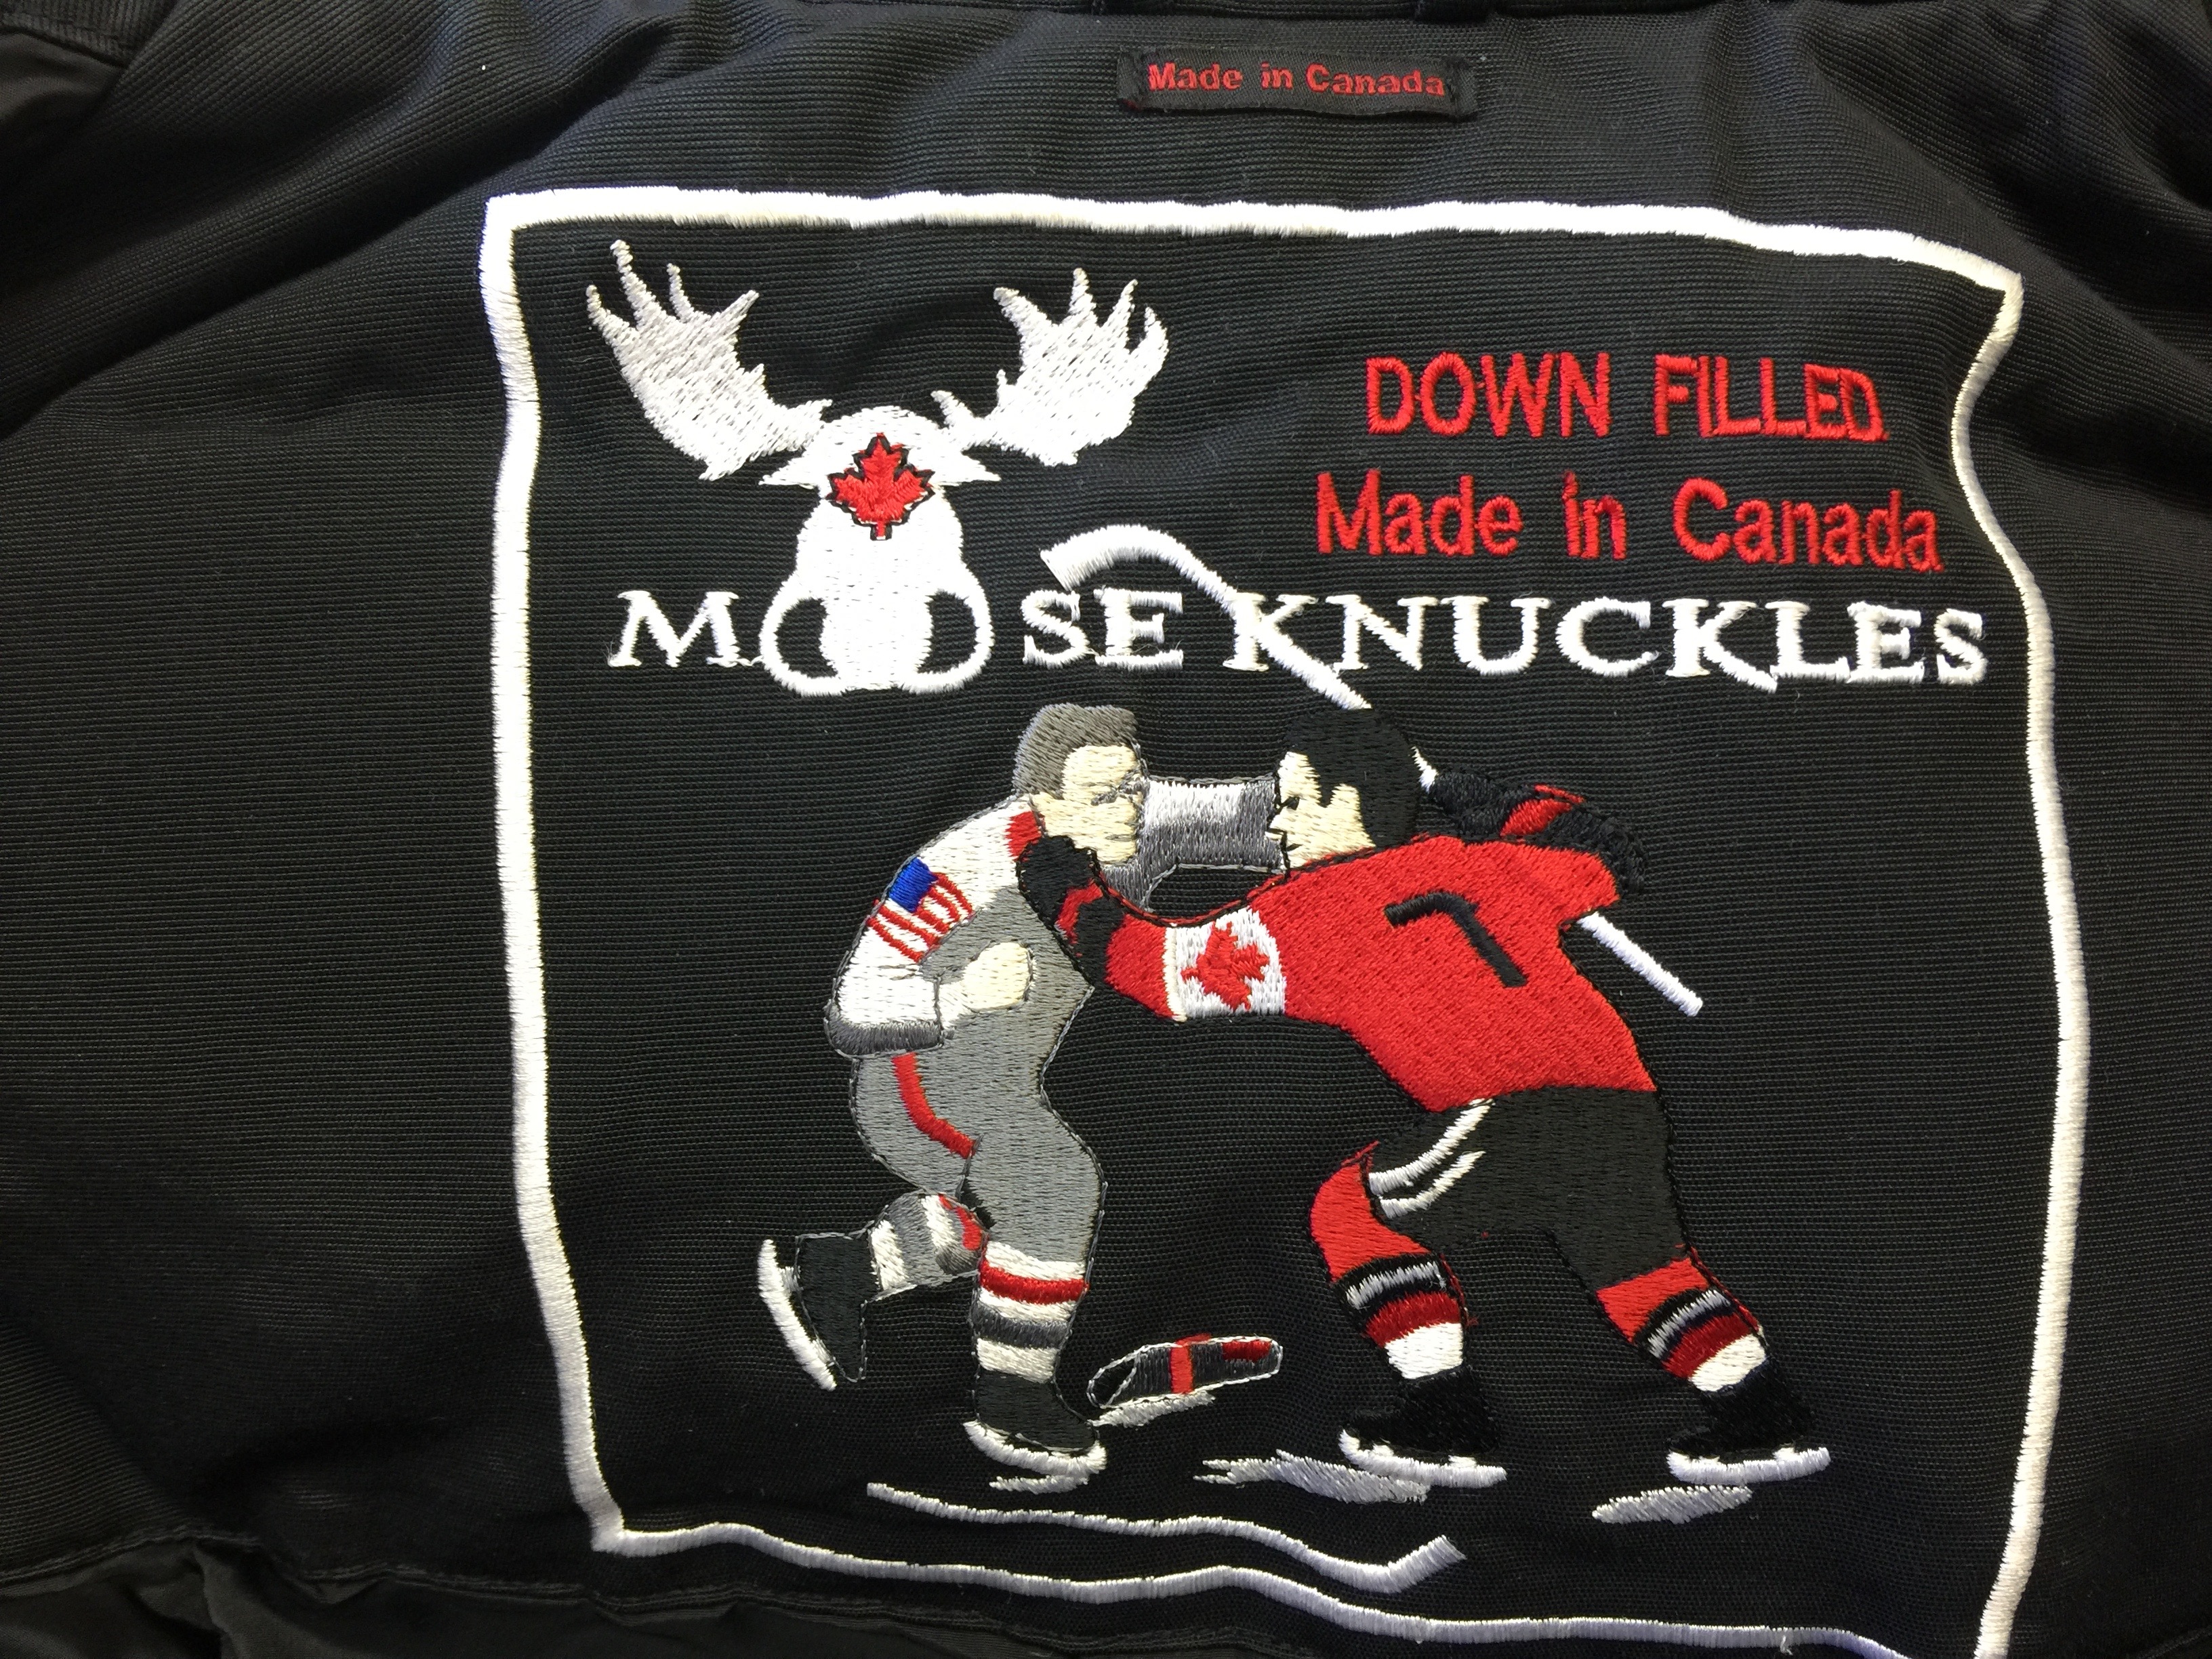 SETTLEMENT APPROVED: Moose Knuckles “Made in Canada” claims – LPC ...